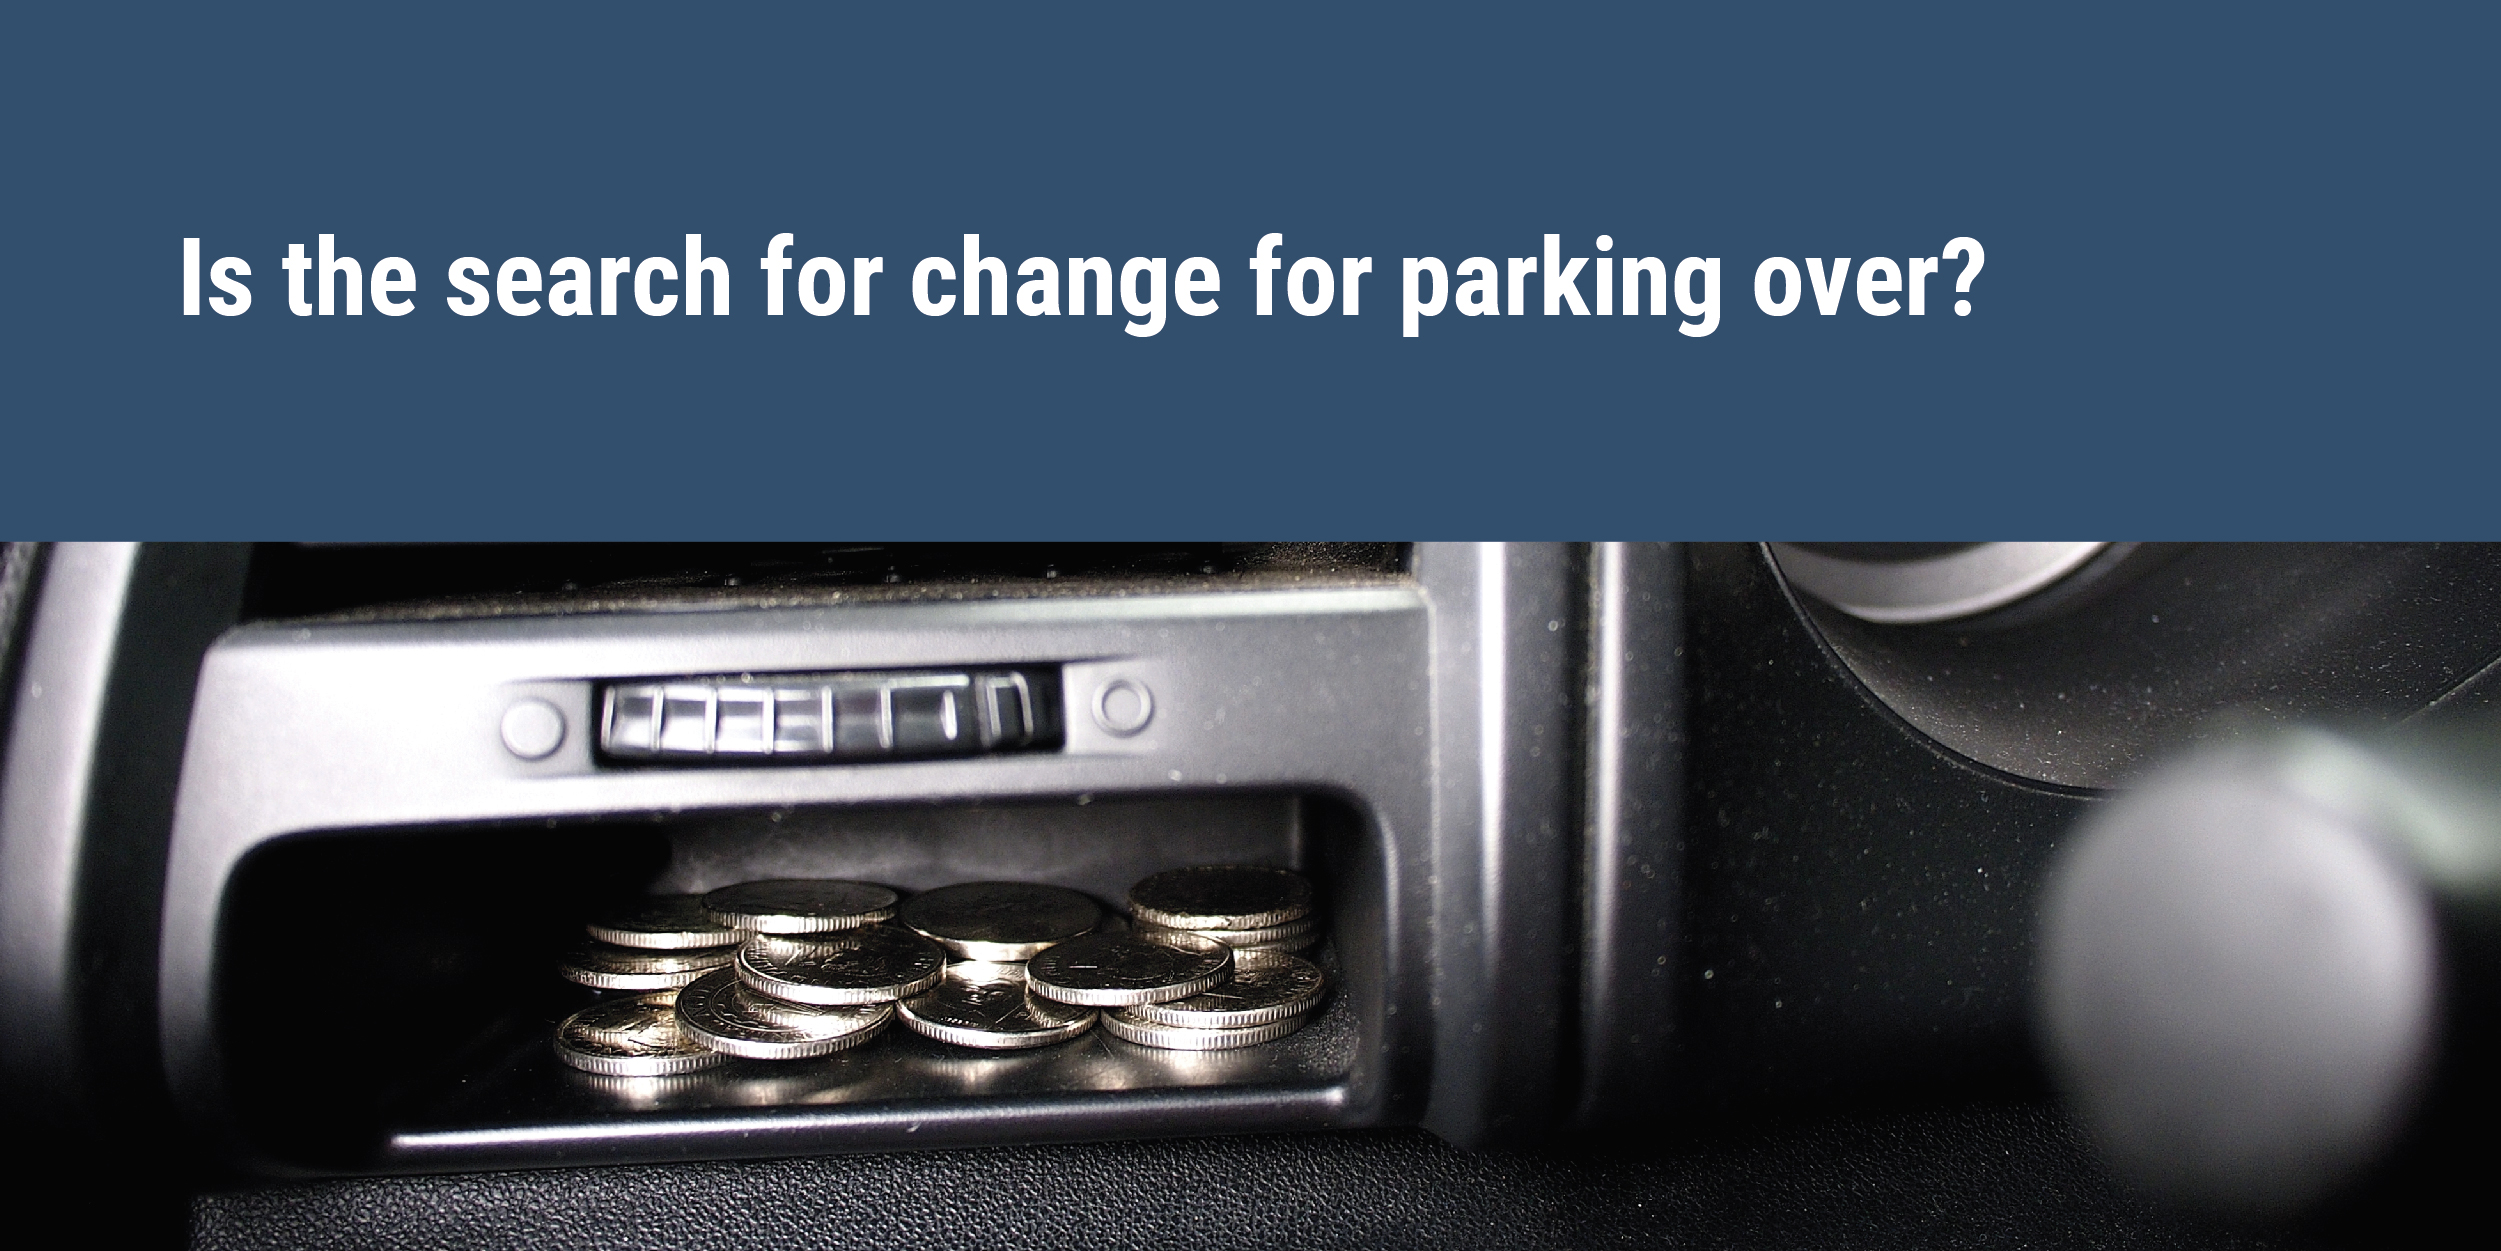 Pay by app. Is the search for change for parking over